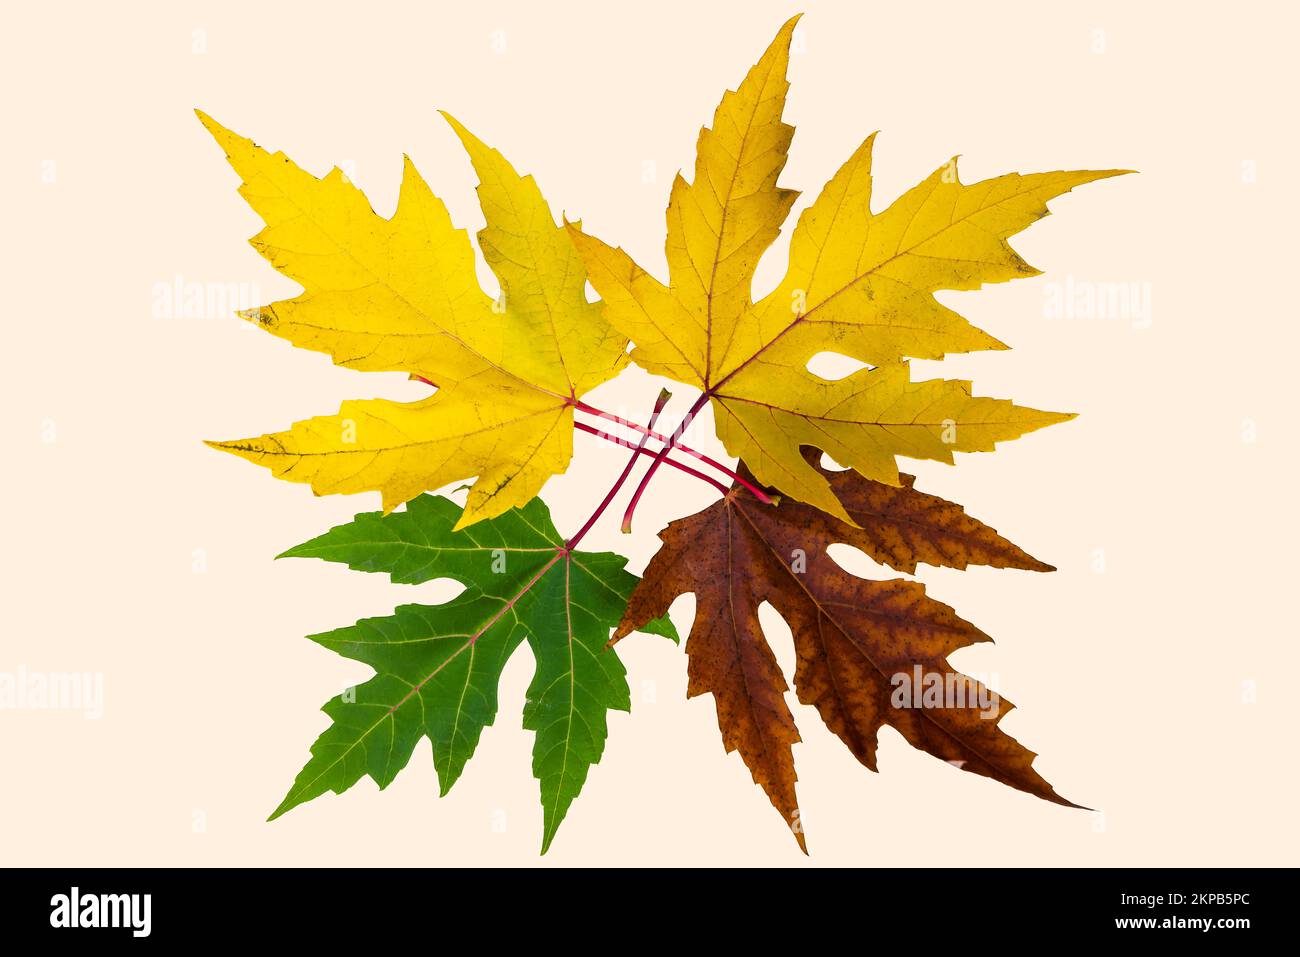 Circle of life with colored autumn leaves Stock Photo